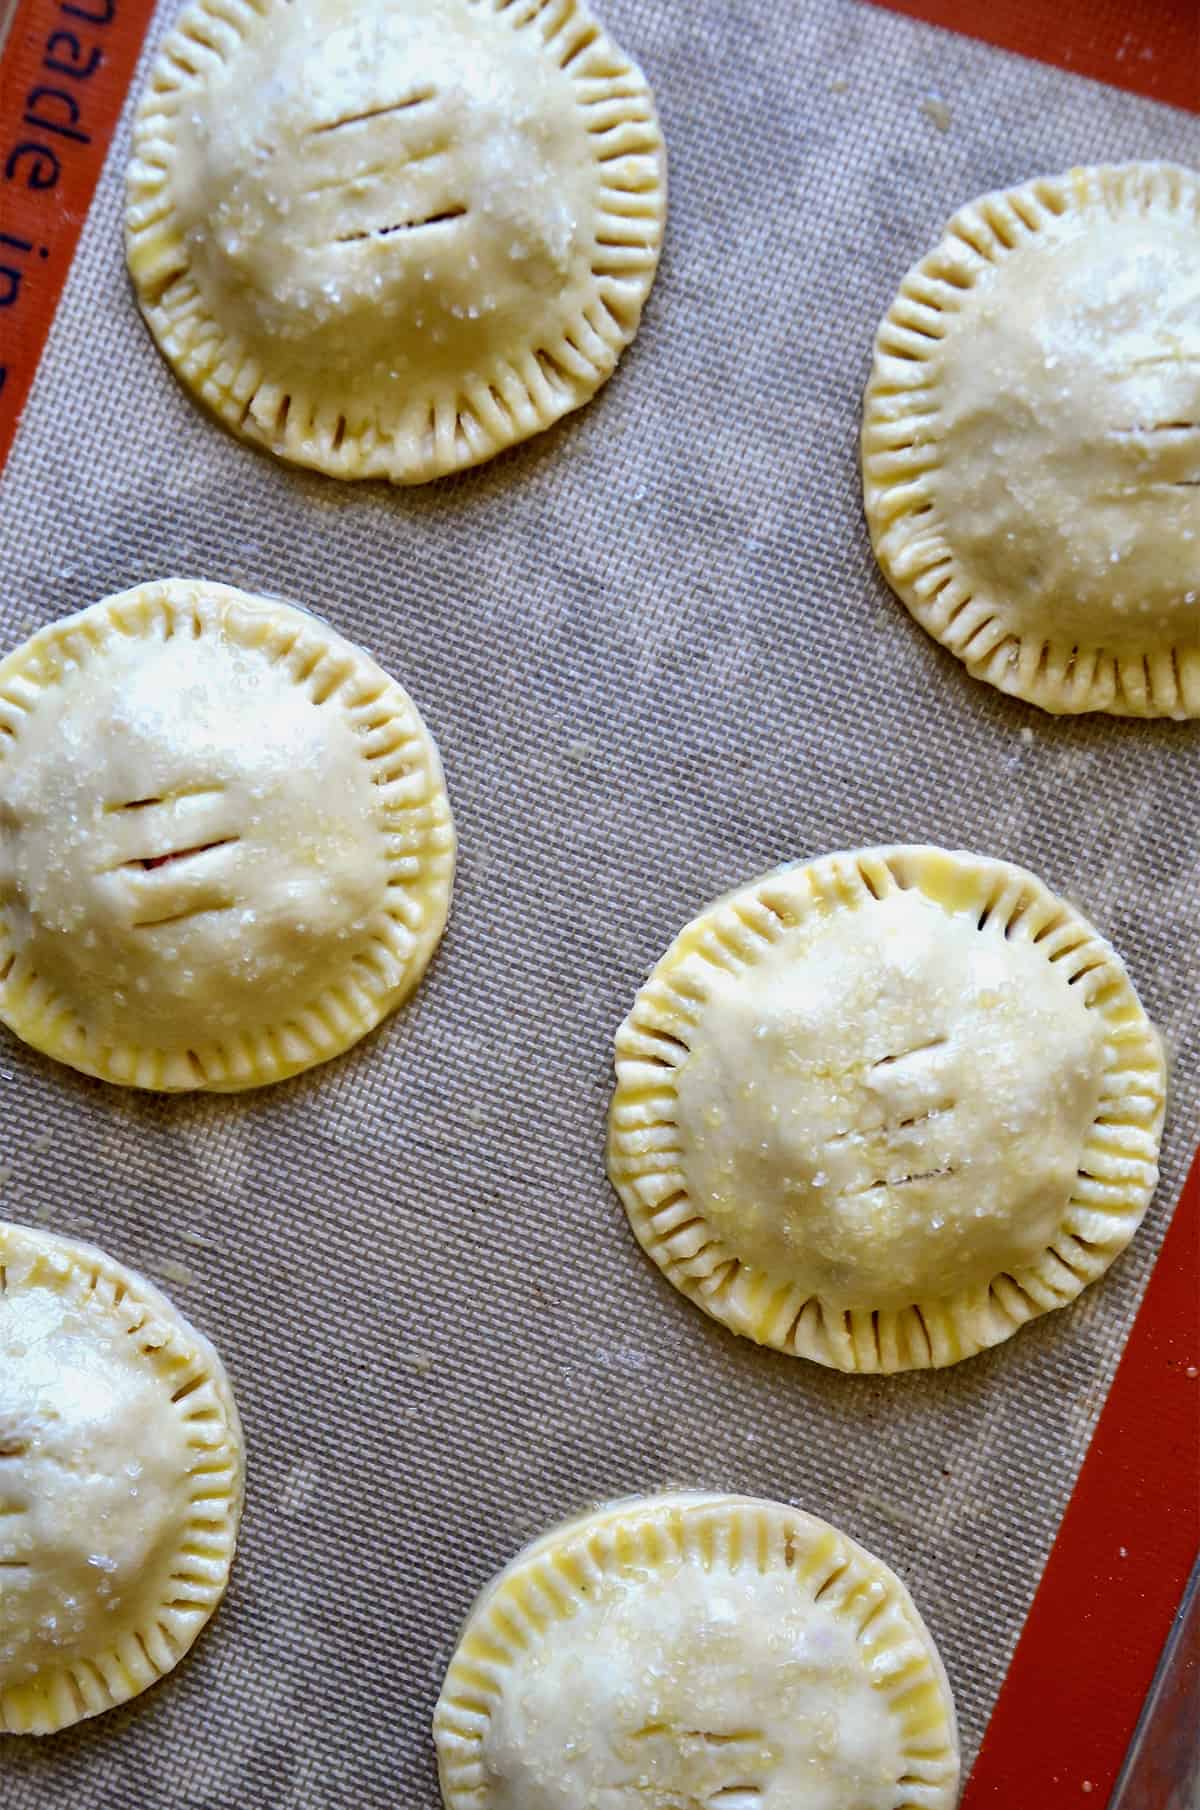 Unbaked hand pies sit on a silicone baking sheet.